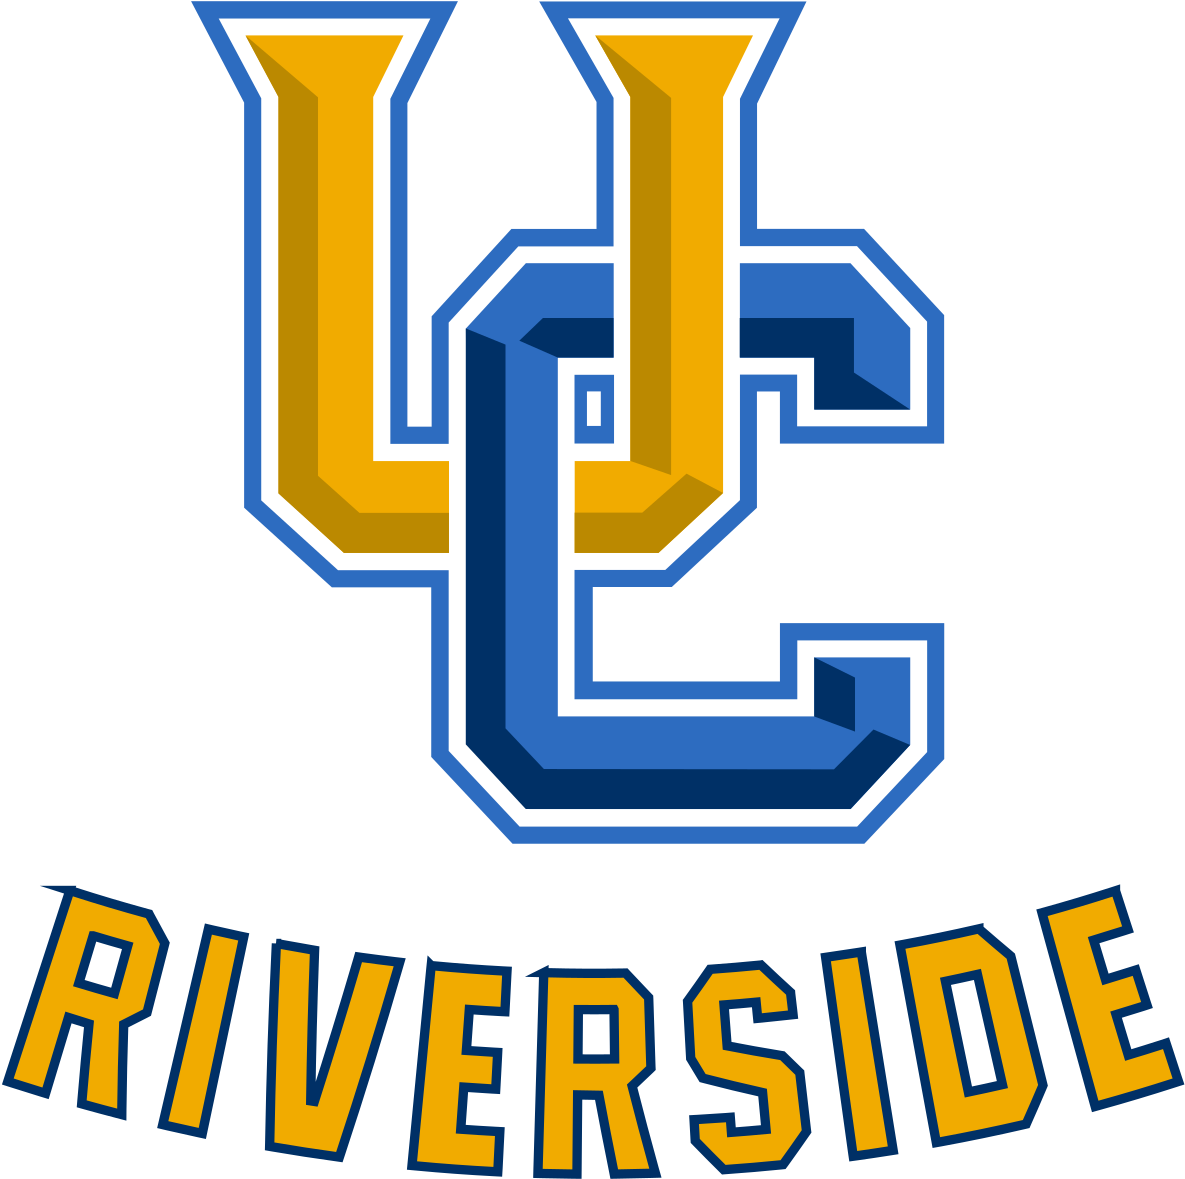 Coaches Confirmed For 2018 College Id Camp - University Of California, Riverside (2000x2000)